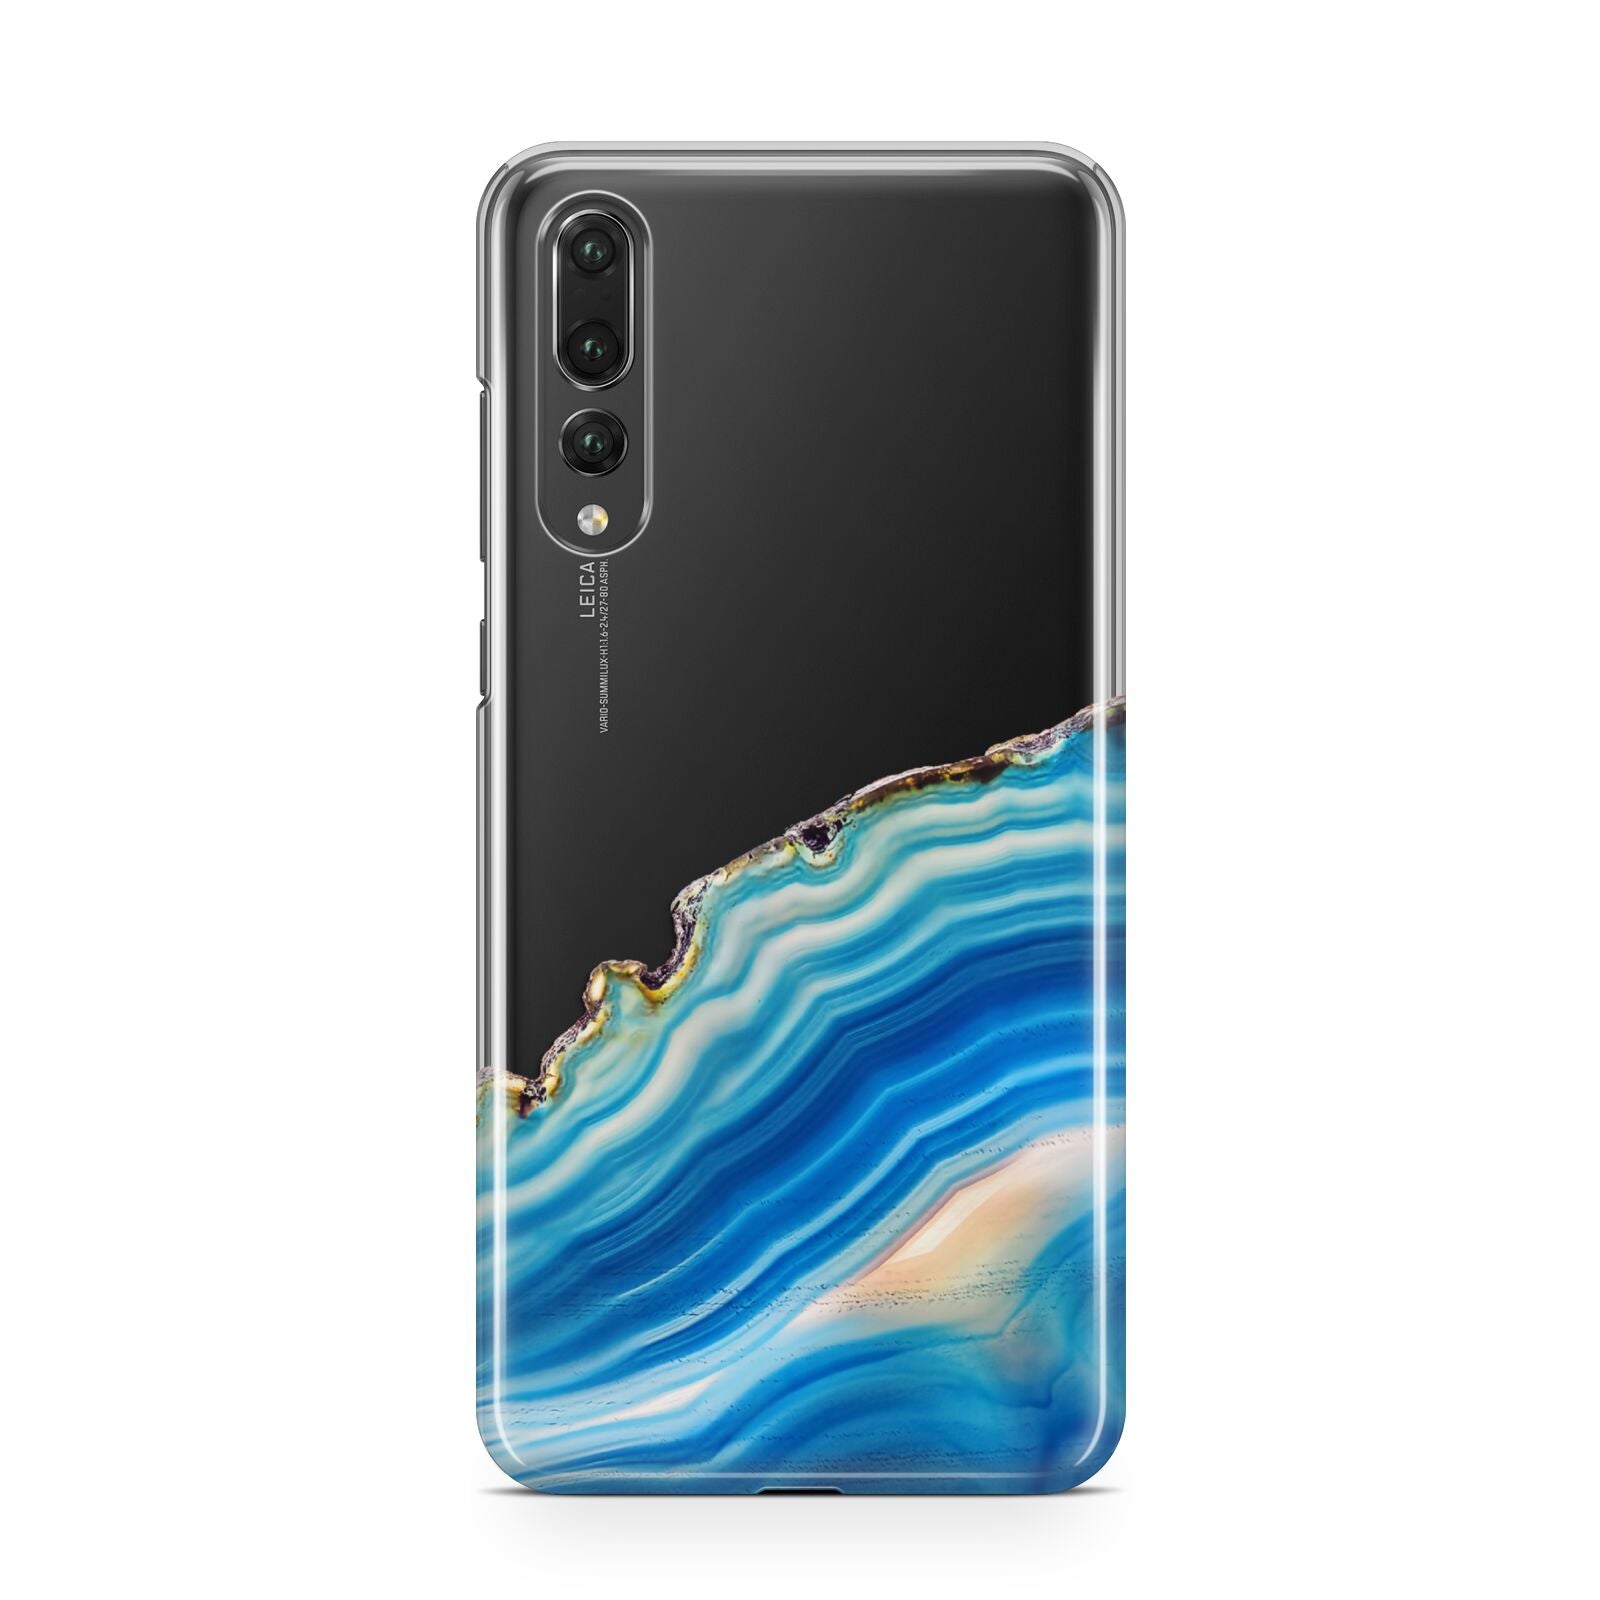 Agate Pale Blue and Bright Blue Huawei P20 Pro Phone Case